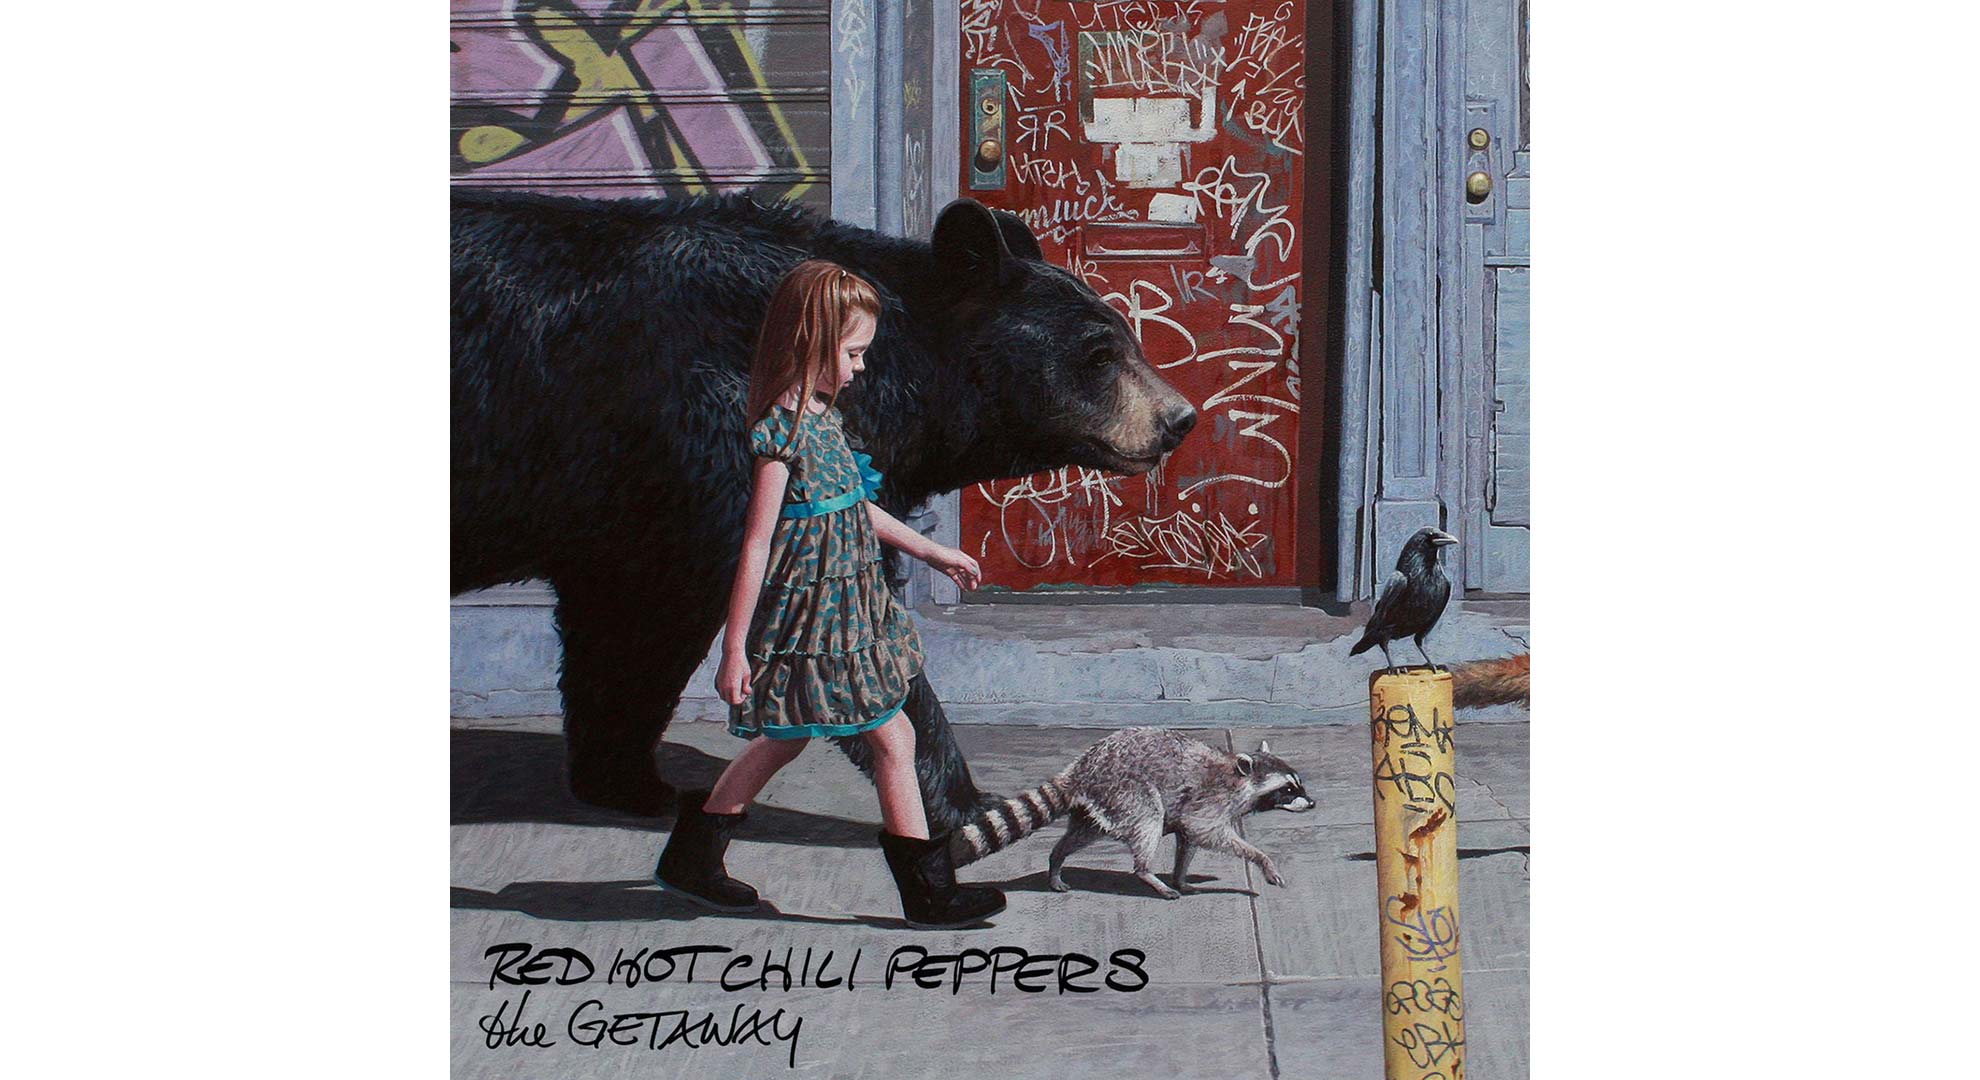 Red hot peppers dark